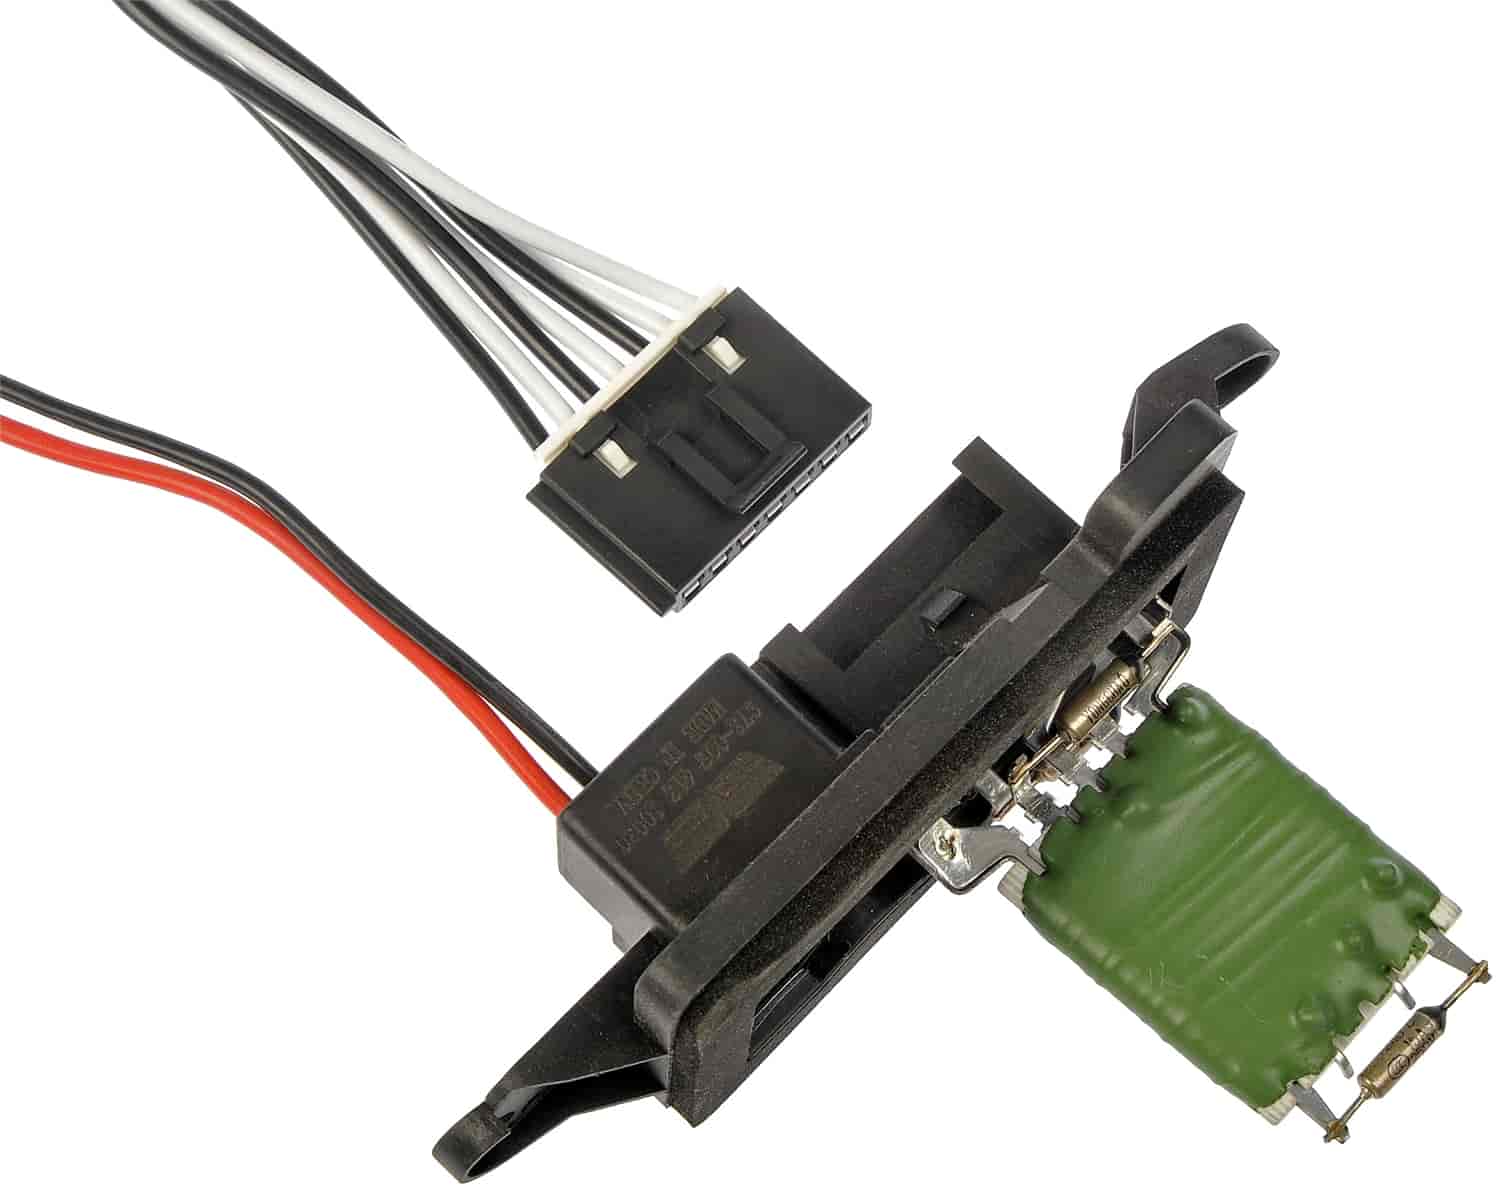 Blower Motor Resistor Kit with Harness 2003-2005 Cadillac, 2003-2007 Chevy/GMC